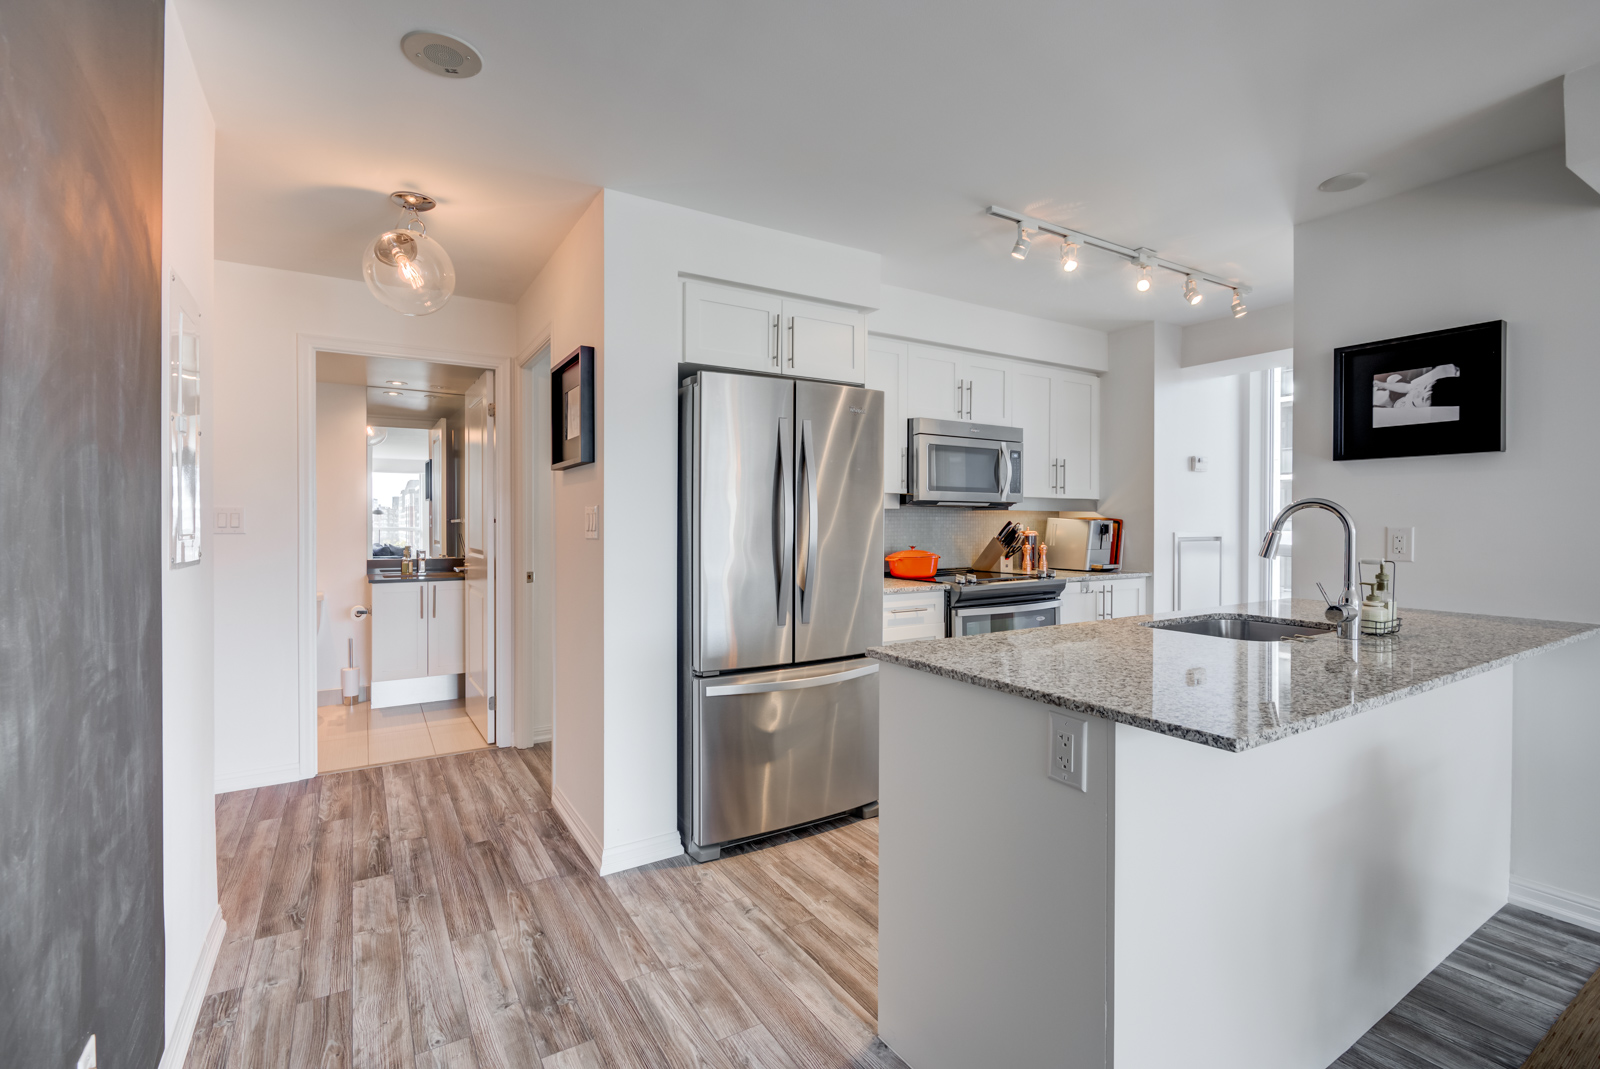 Breakfast bar with granite counter-top and stainless-steel kitchen appliances at 400 Adelaide St E Unit 704 condos in Moss Park.